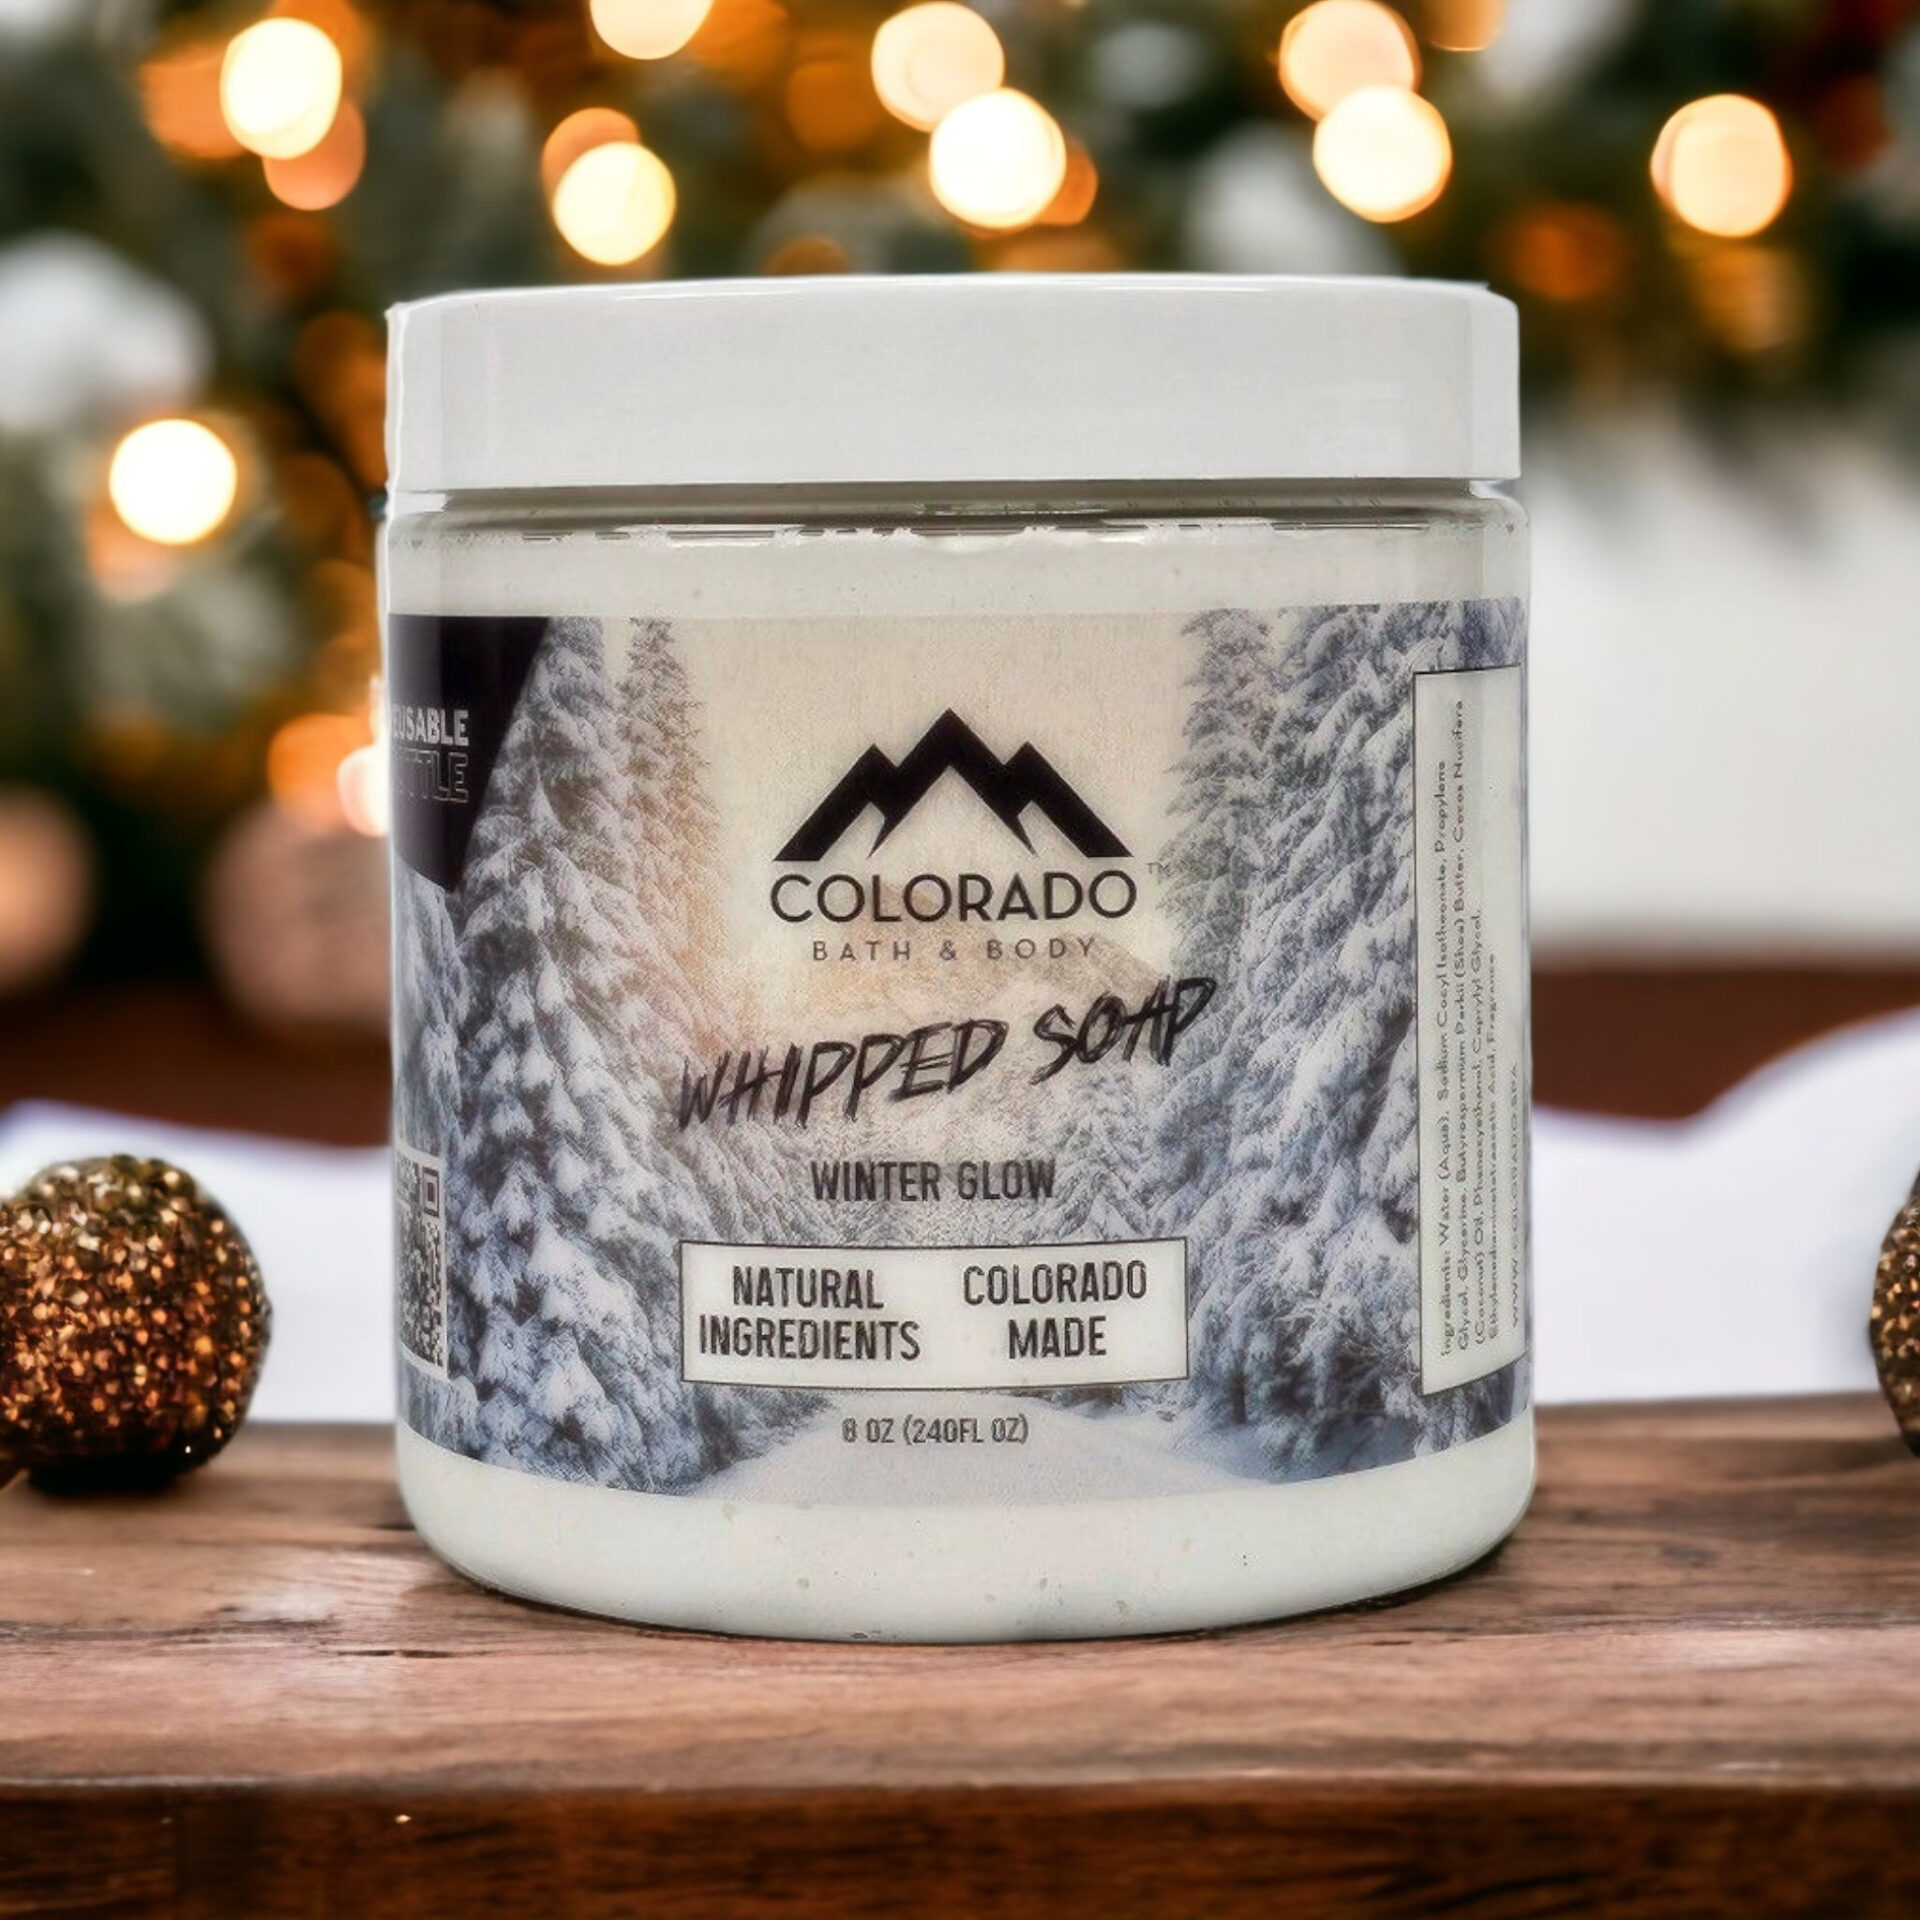 Winter Glow Limited Edition Whipped Soap